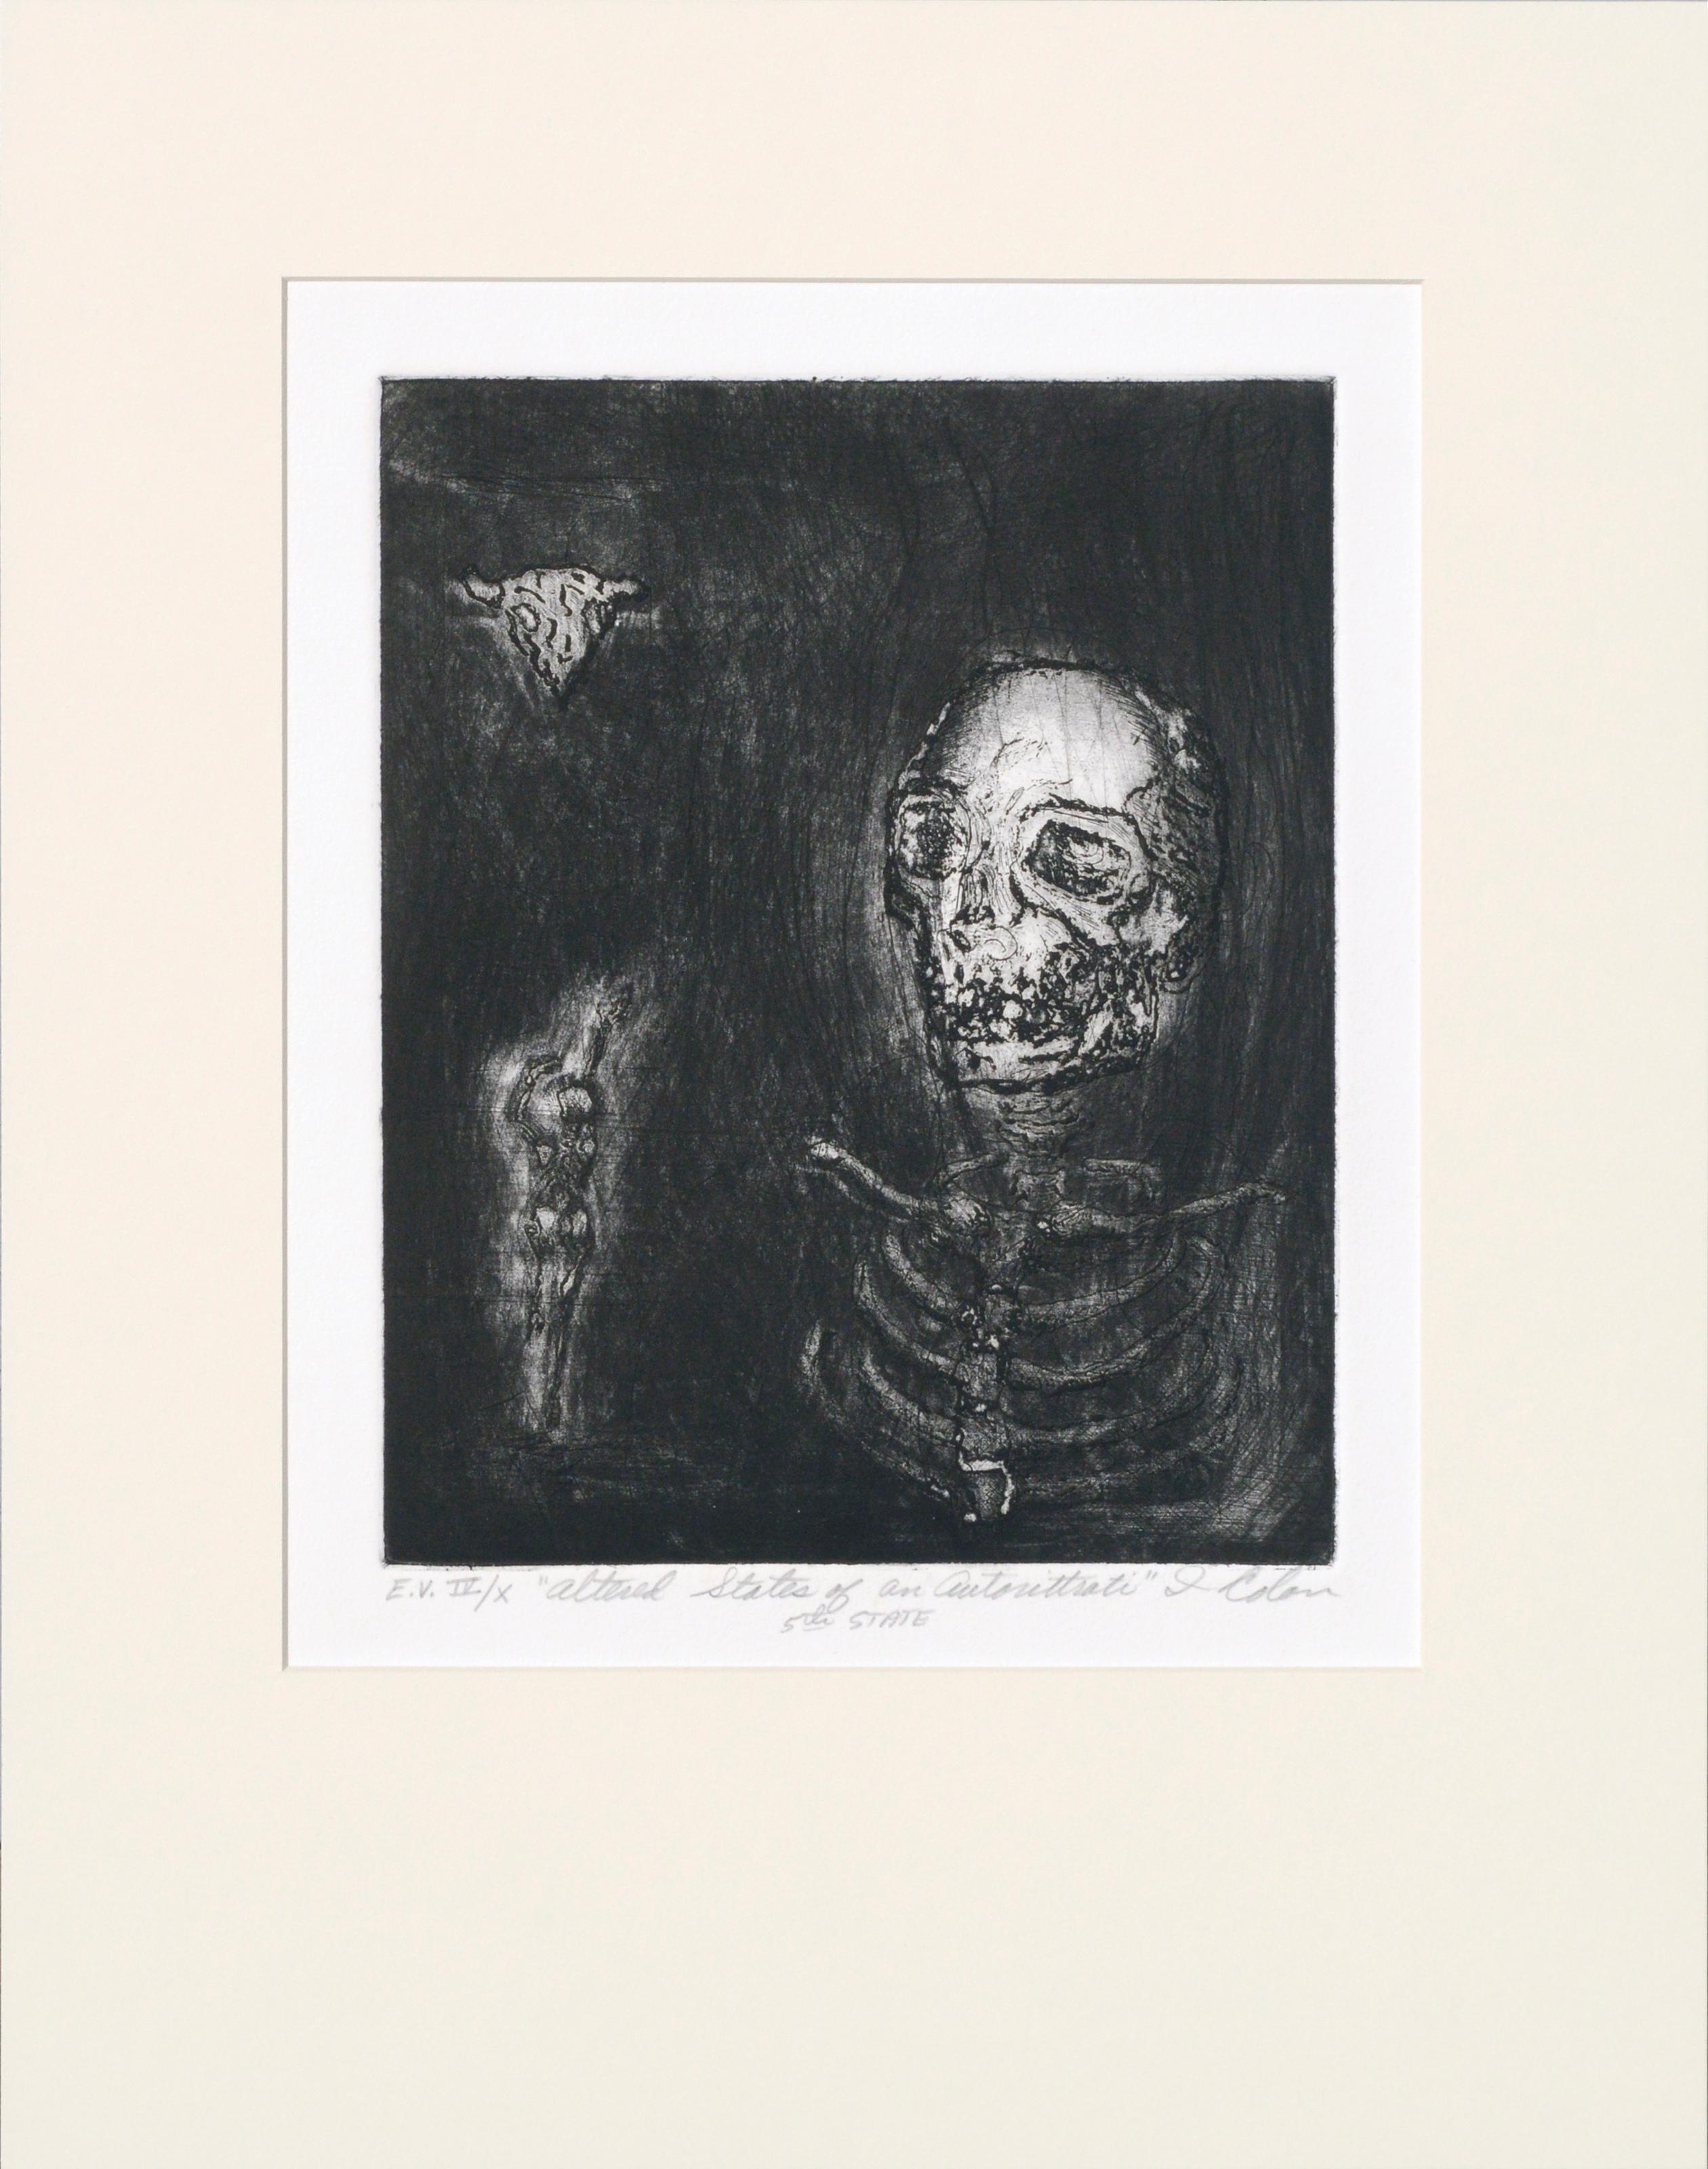 "Altered States of an Autorittrati", Skeleton Limited Edition Lithograph 